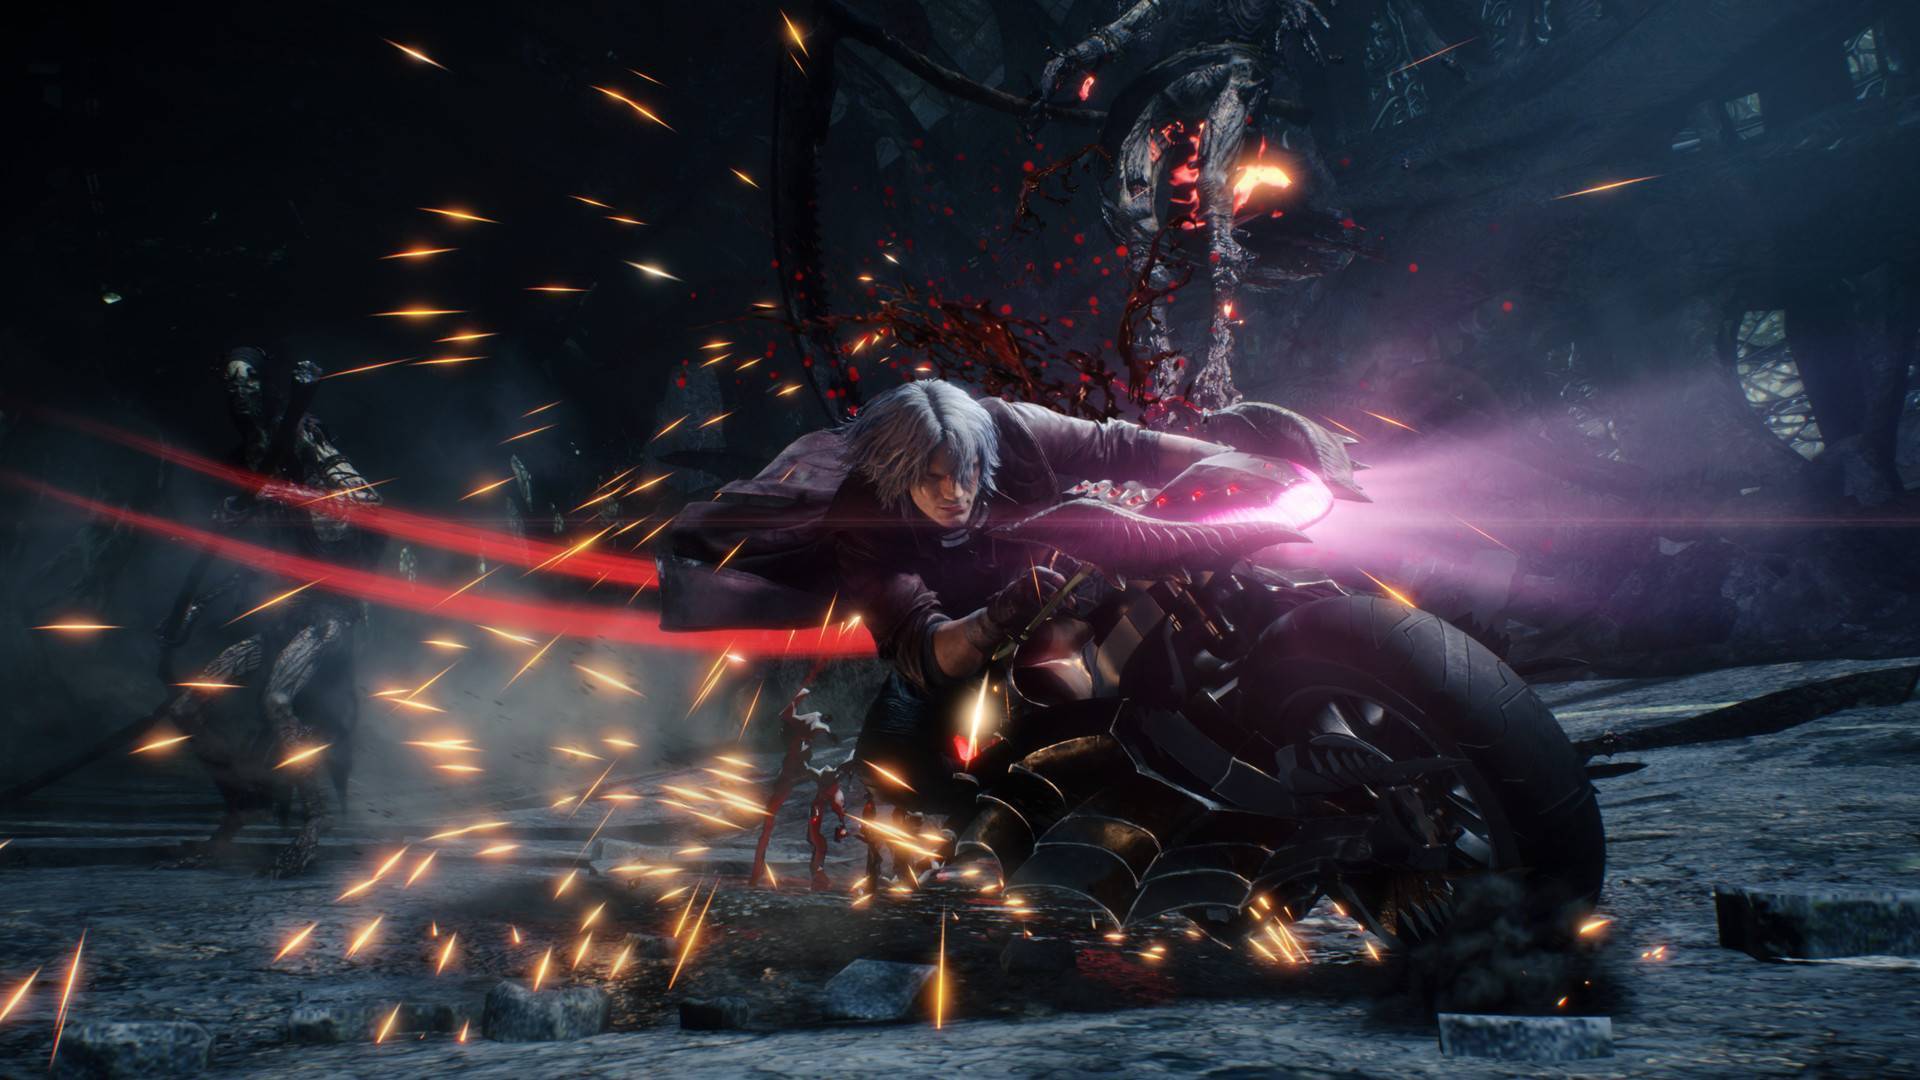 Buy cheap Devil May Cry 5 Deluxe + Vergil cd key - lowest price